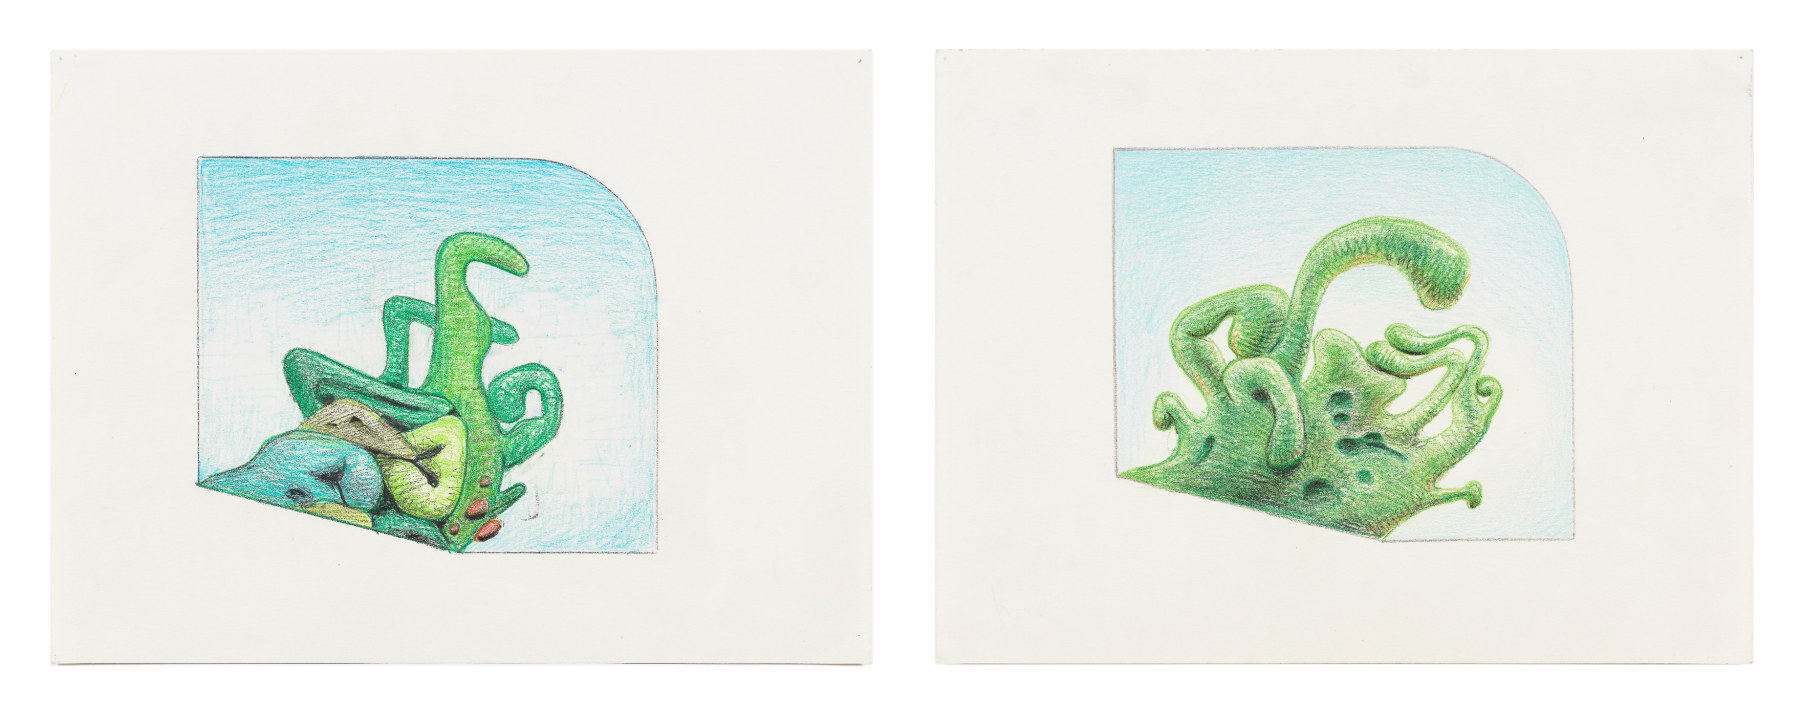 Untitled, 2005, Colored pencil on paper, in two parts, Each: 9 1/2 x 12 1/2 inches